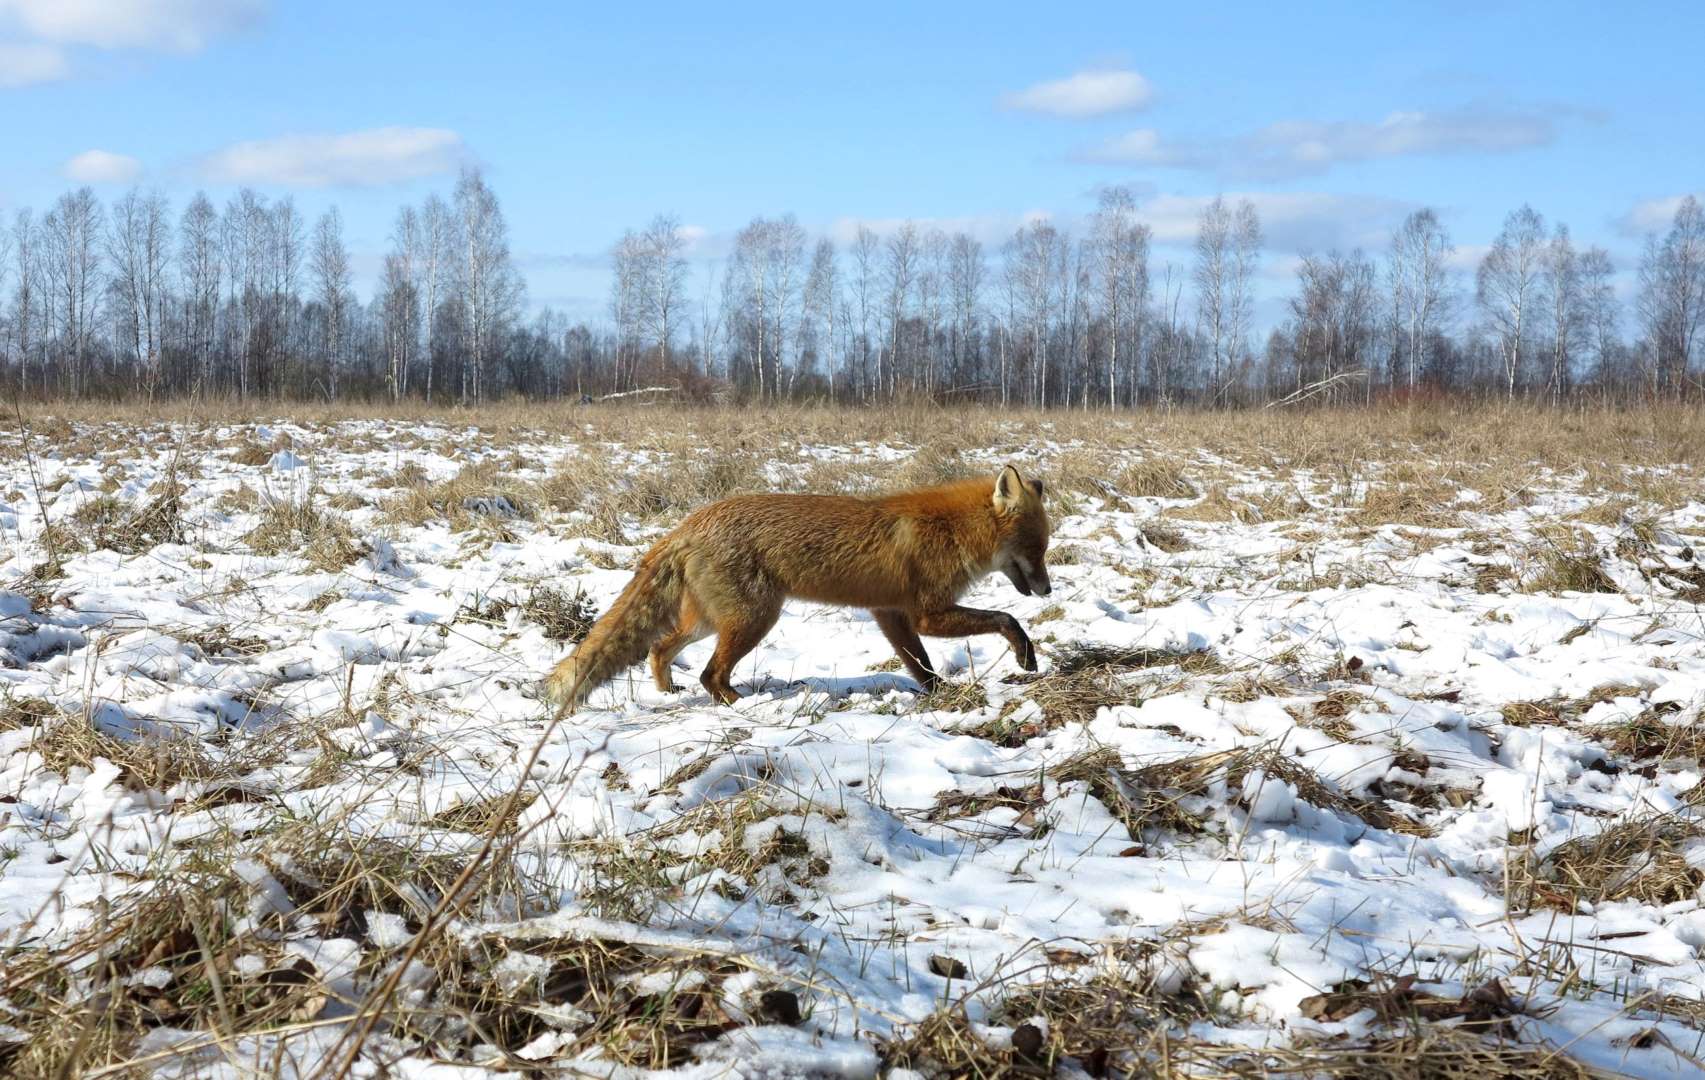 World Remembers 30th Anniversary of Chernobyl Disaster. Wildlife Returns to Exclusion Zone. Fox seen in Exclusion Zone.